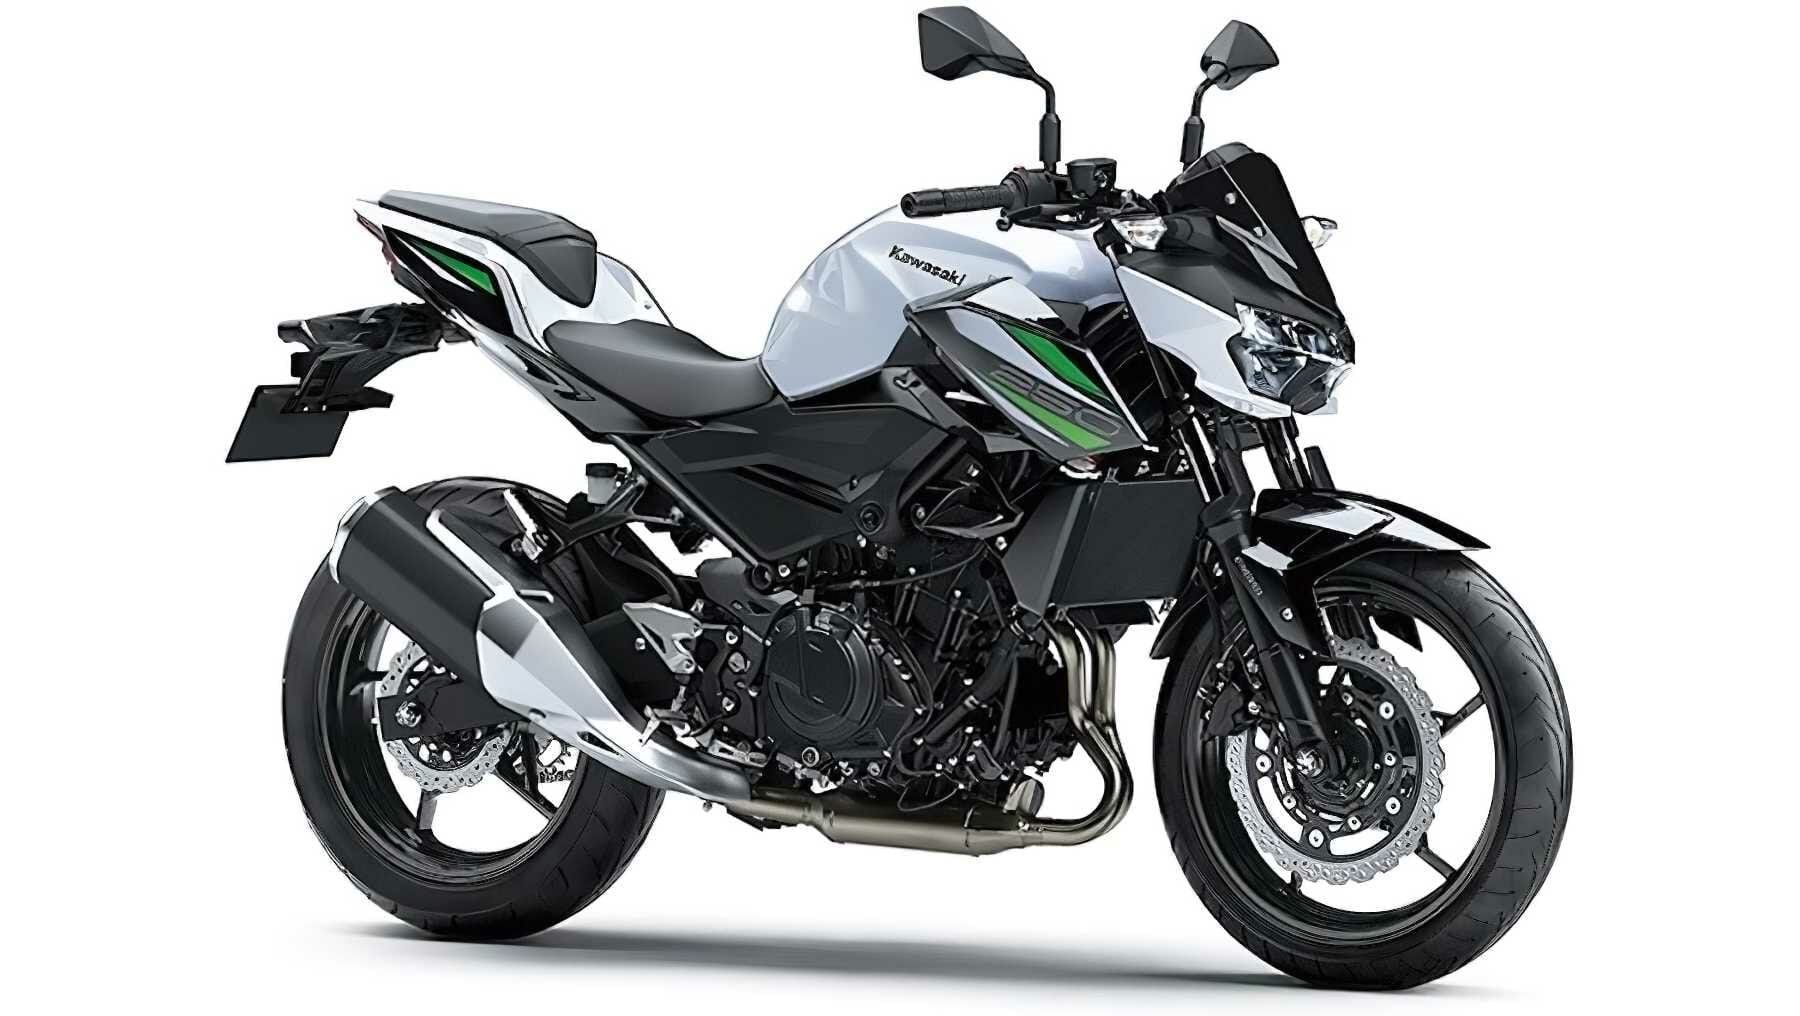 Rumor: Kawasaki 4-cylinder Z250
- also in the MOTORCYCLES.NEWS APP